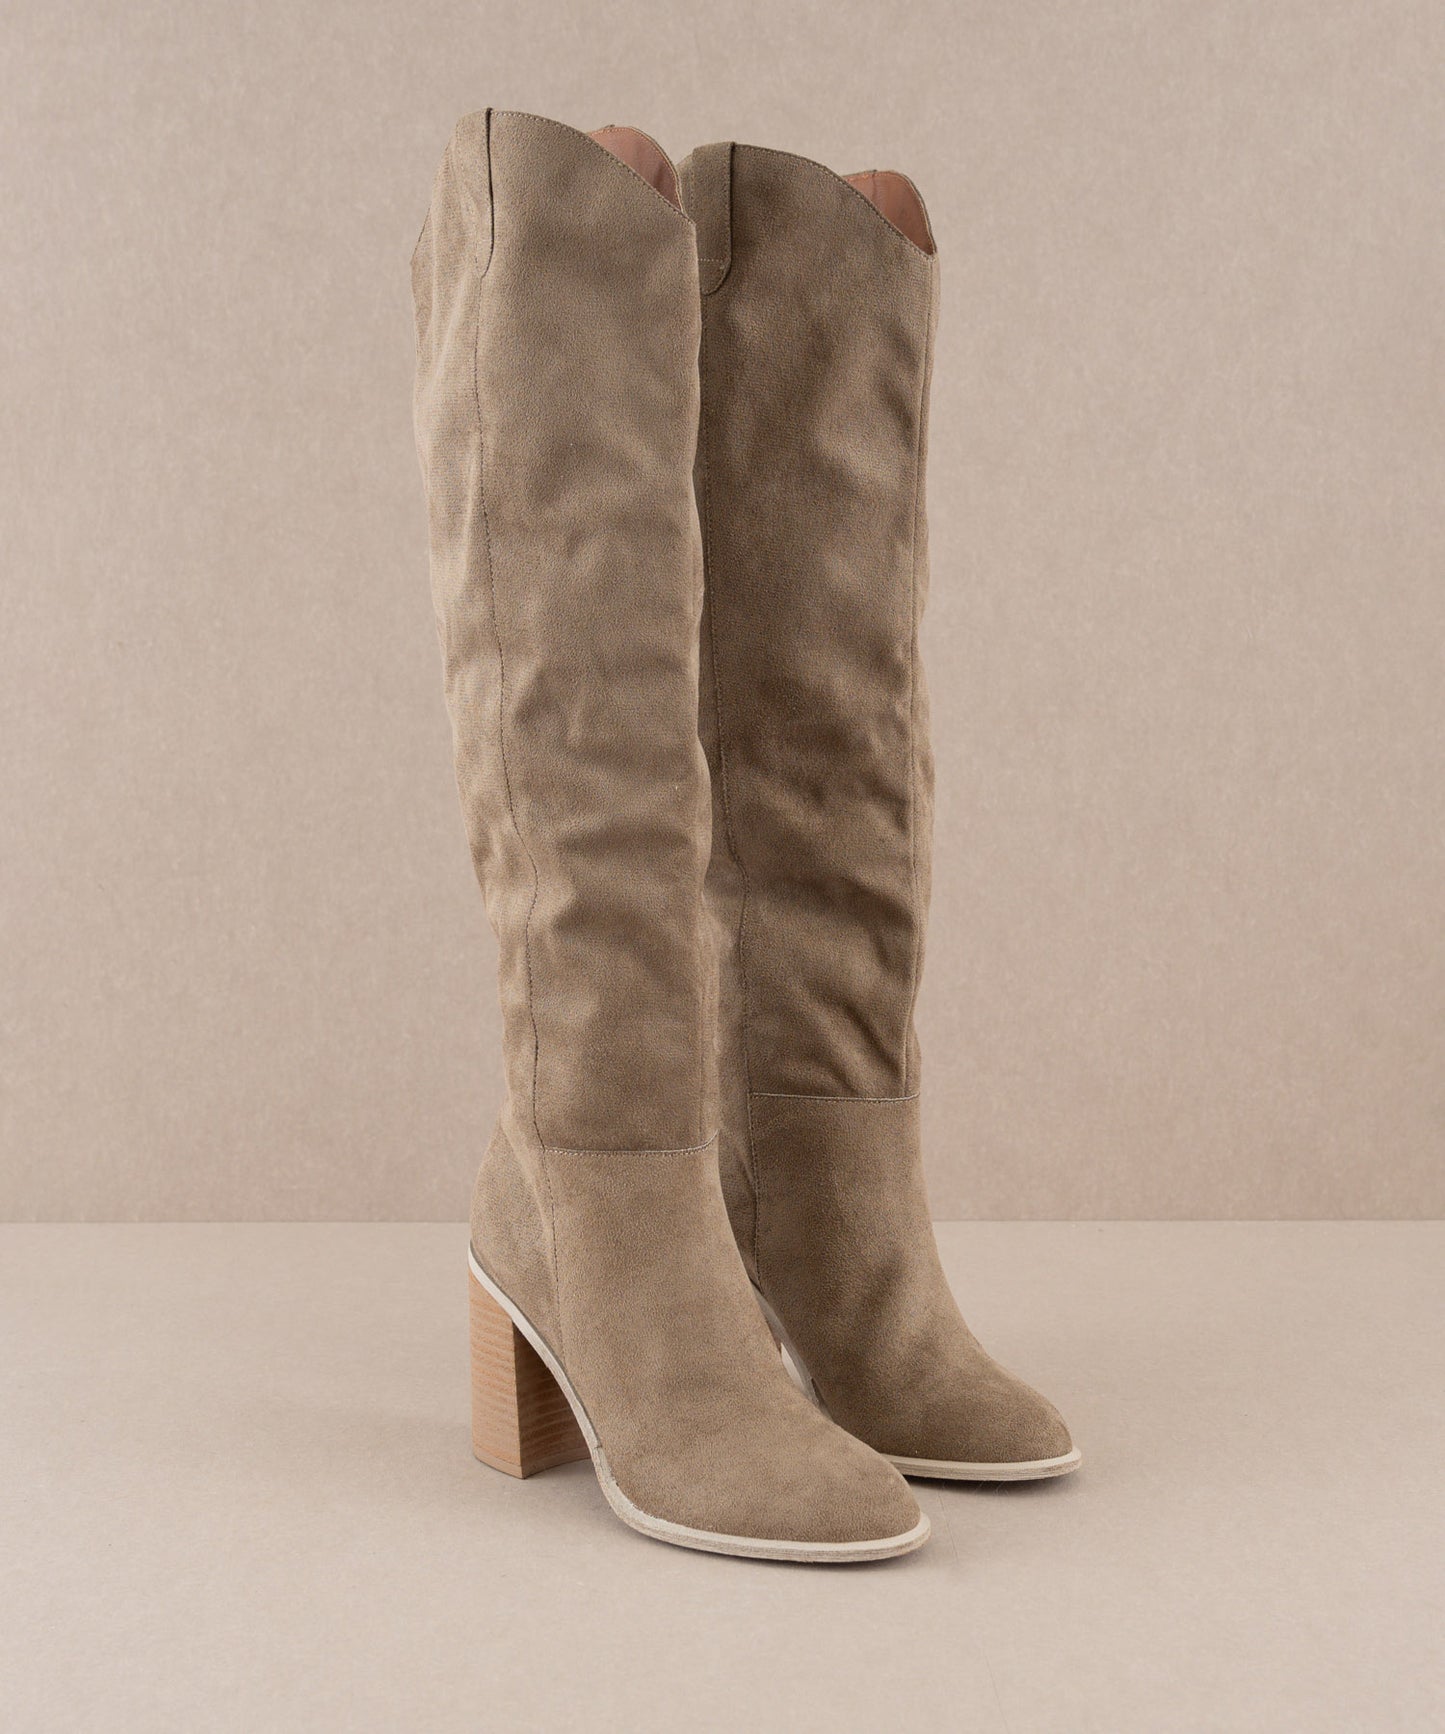 The Stephanie - Grey-Brown Knee-High Boots